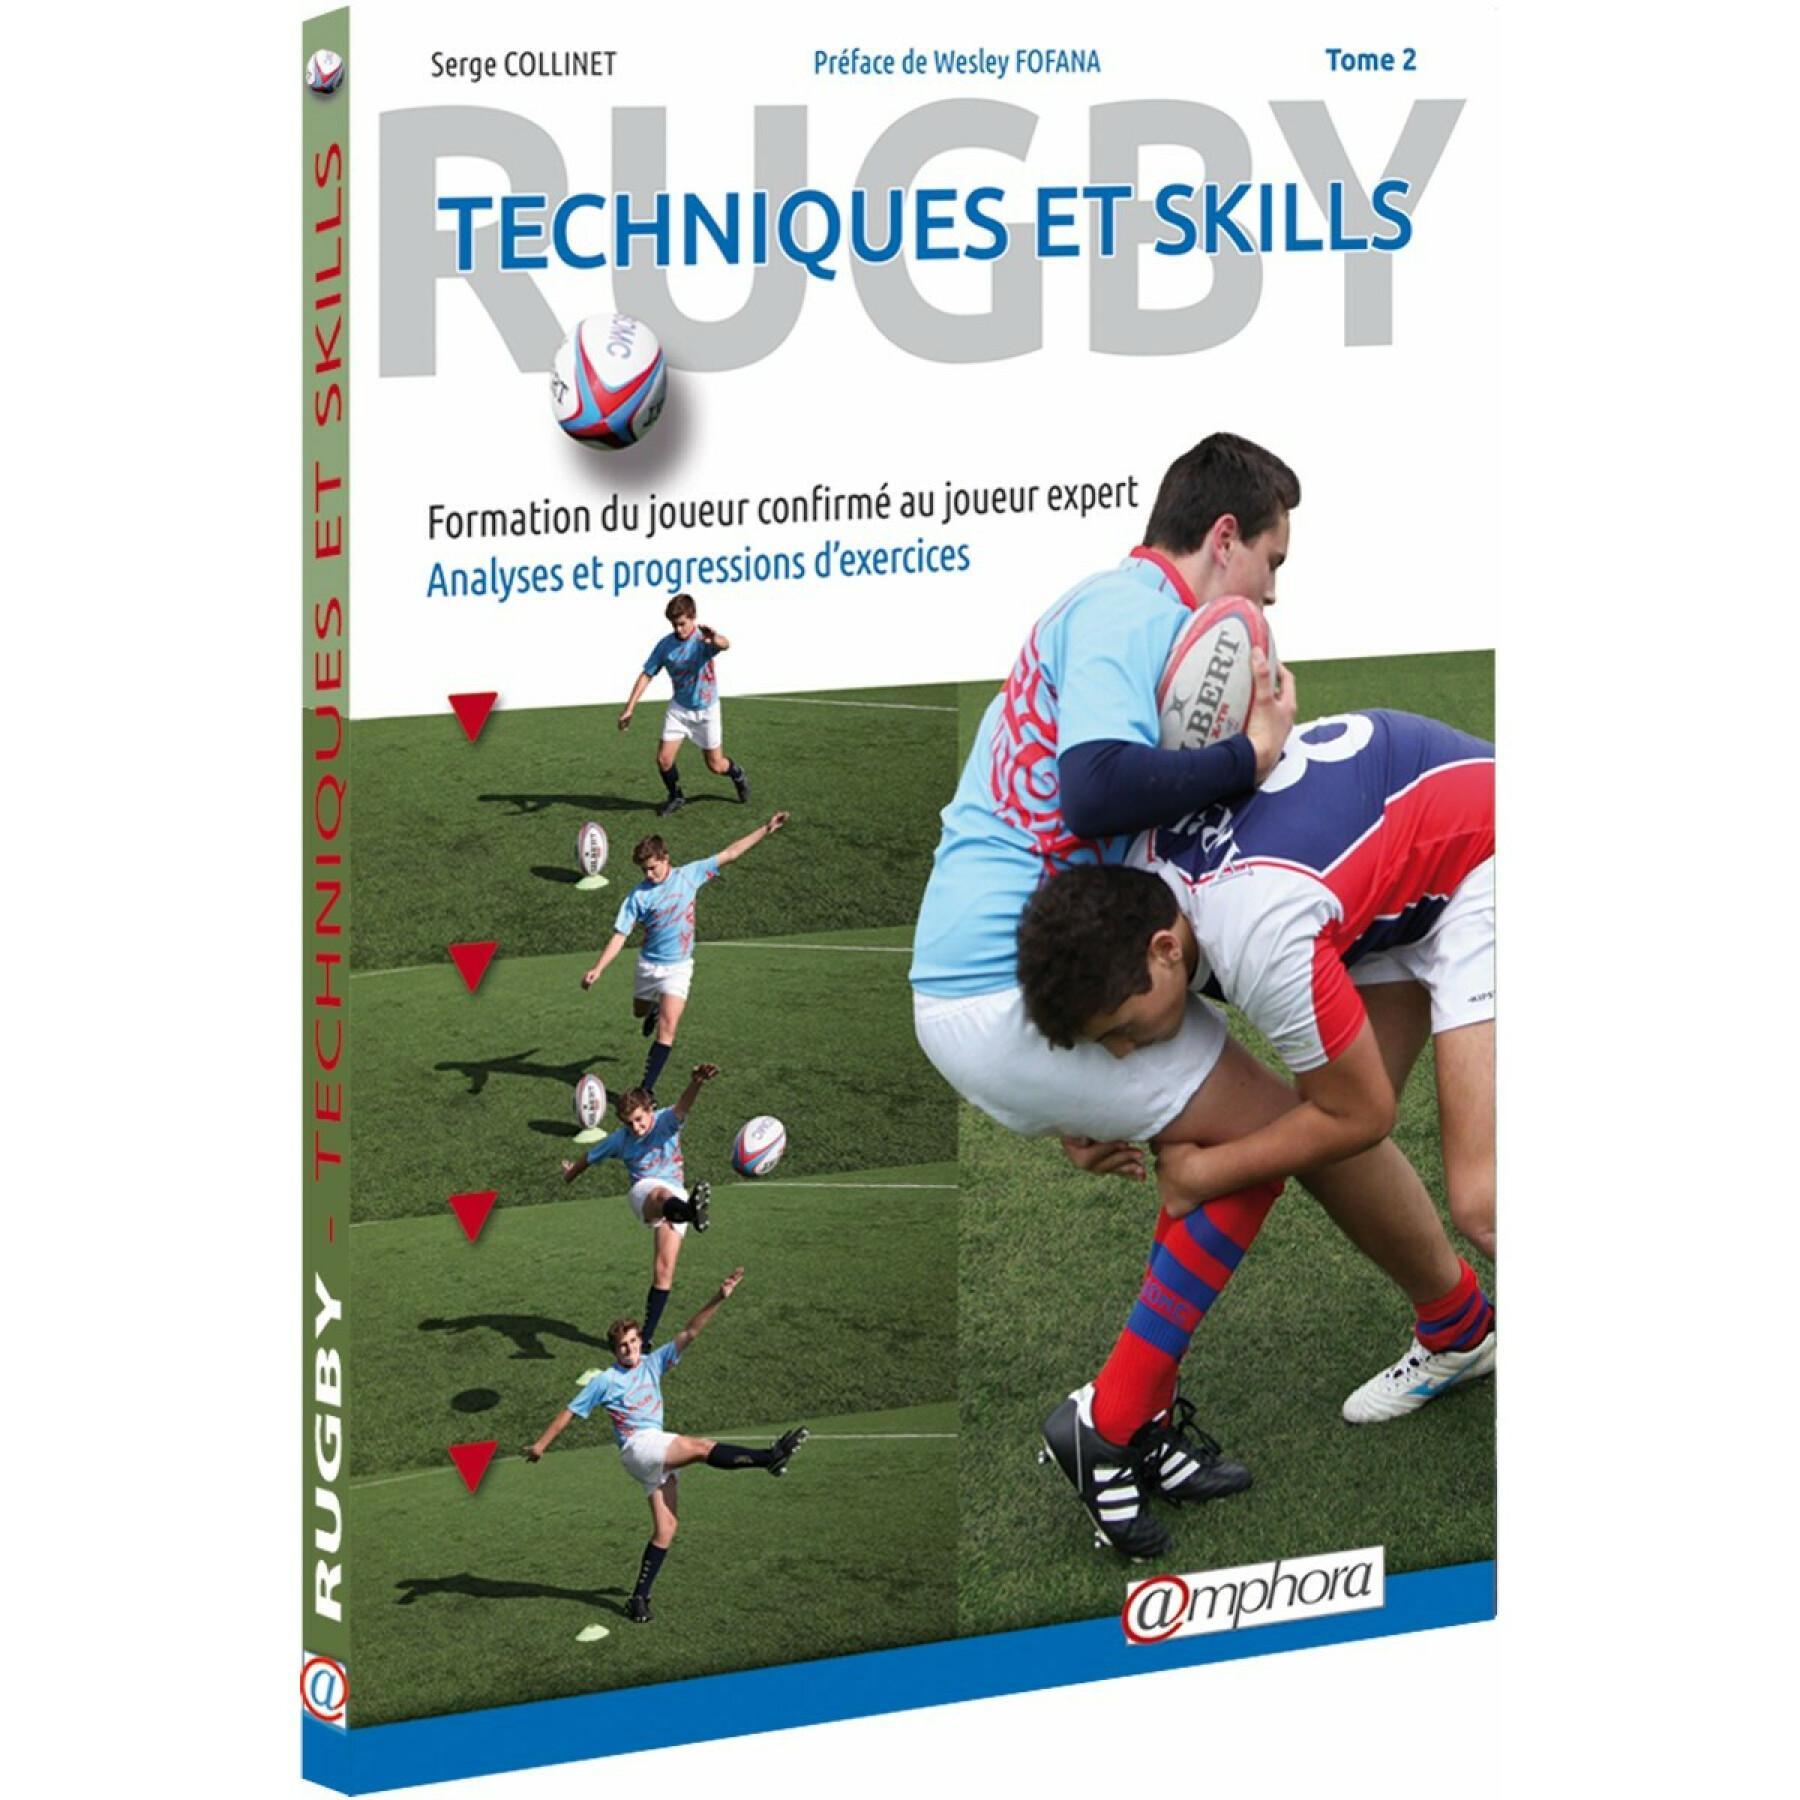 Rugby book - techniques & skills (tome 2) Amphora